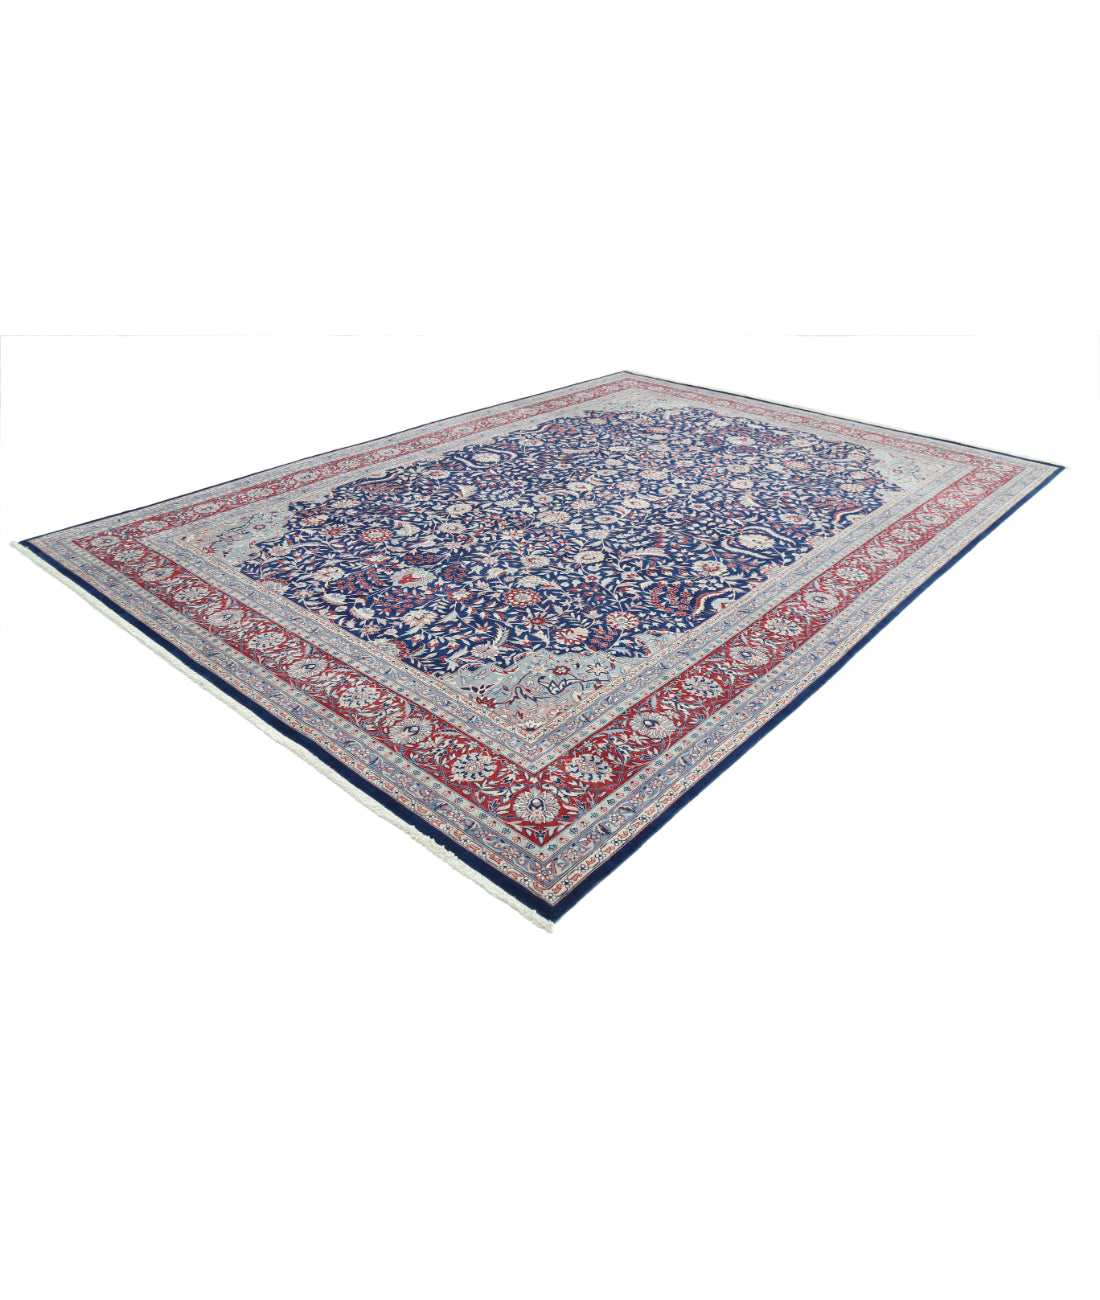 Heritage 9' 9" X 13' 10" Hand-Knotted Wool Rug 9' 9" X 13' 10" (297 X 422) / Blue / Red